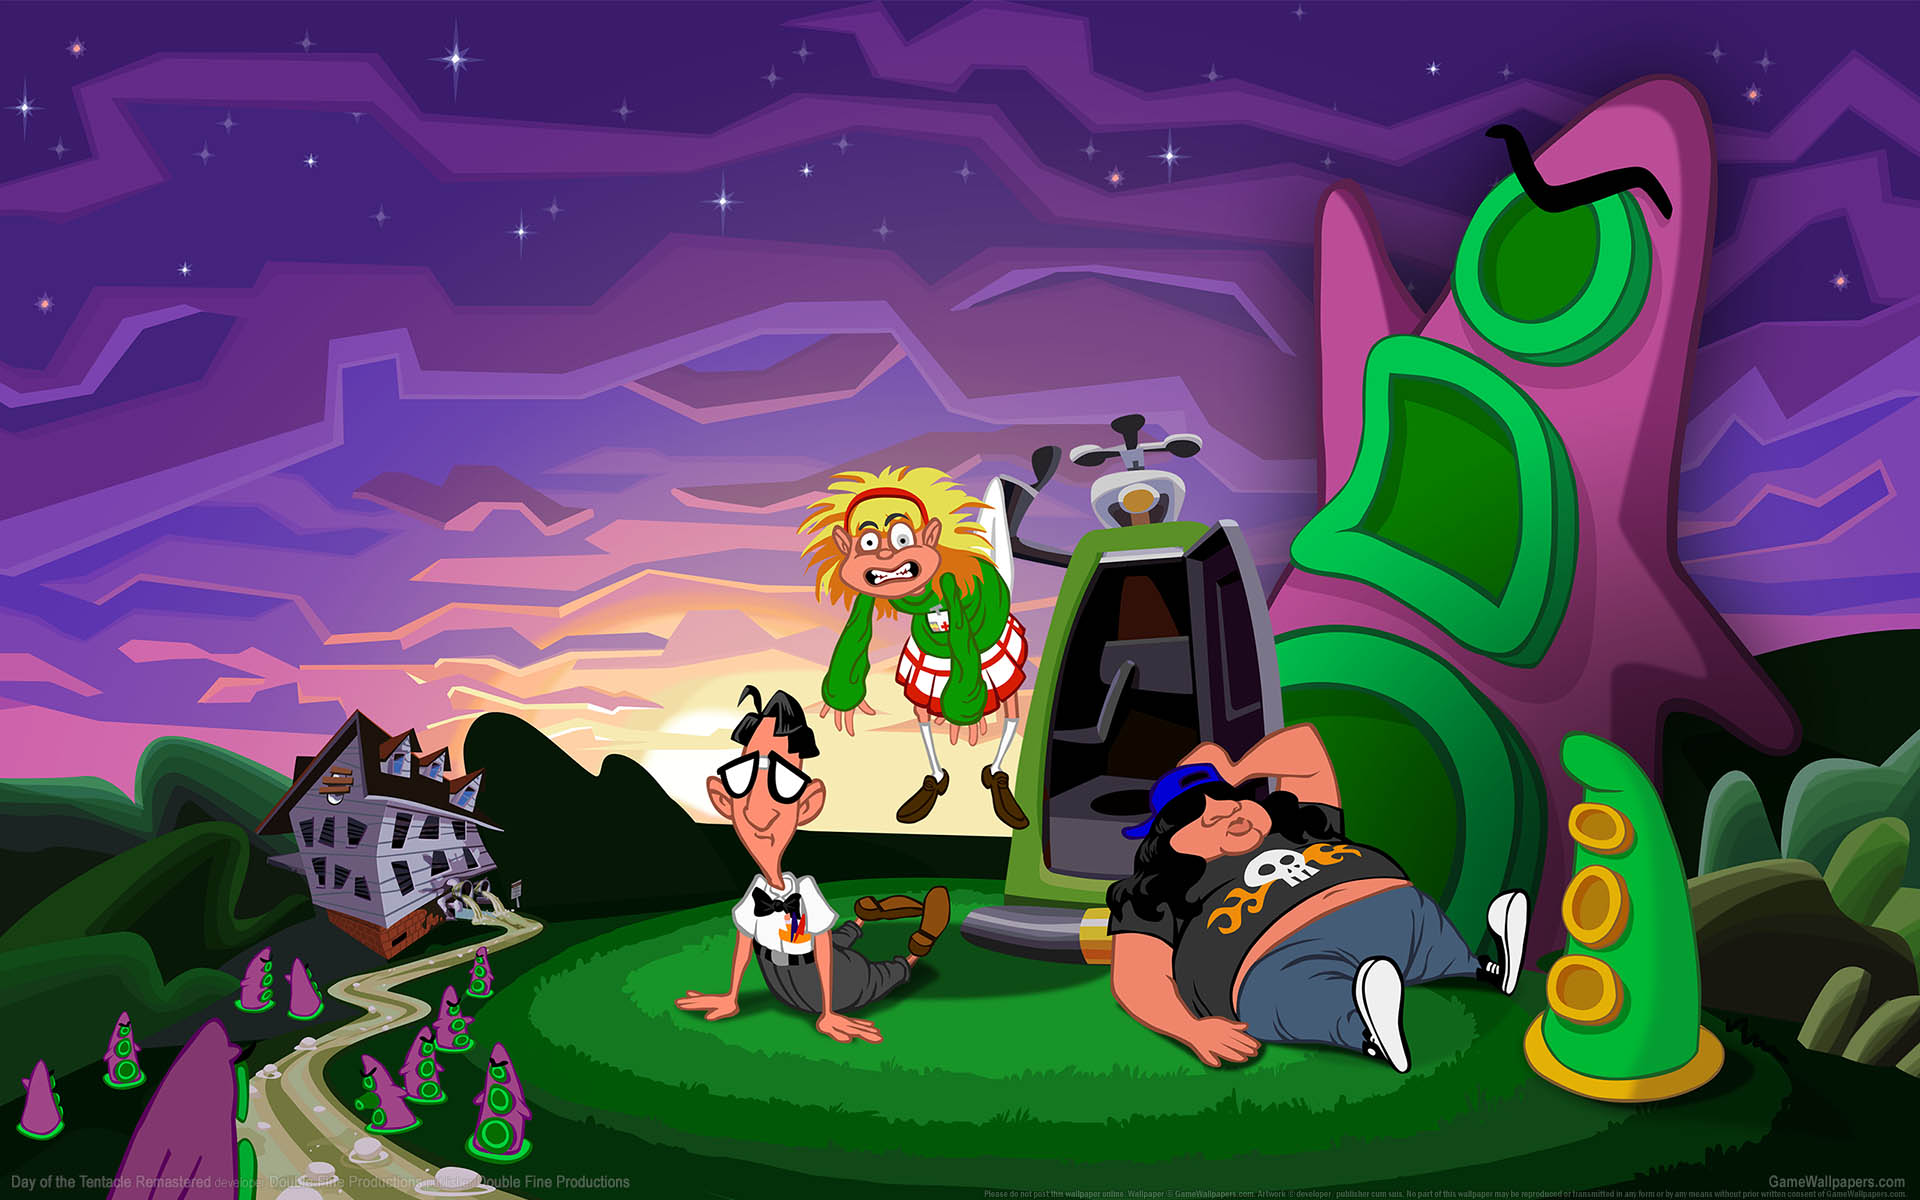 Day of the Tentacle Remastered achtergrond 01 1920x1200